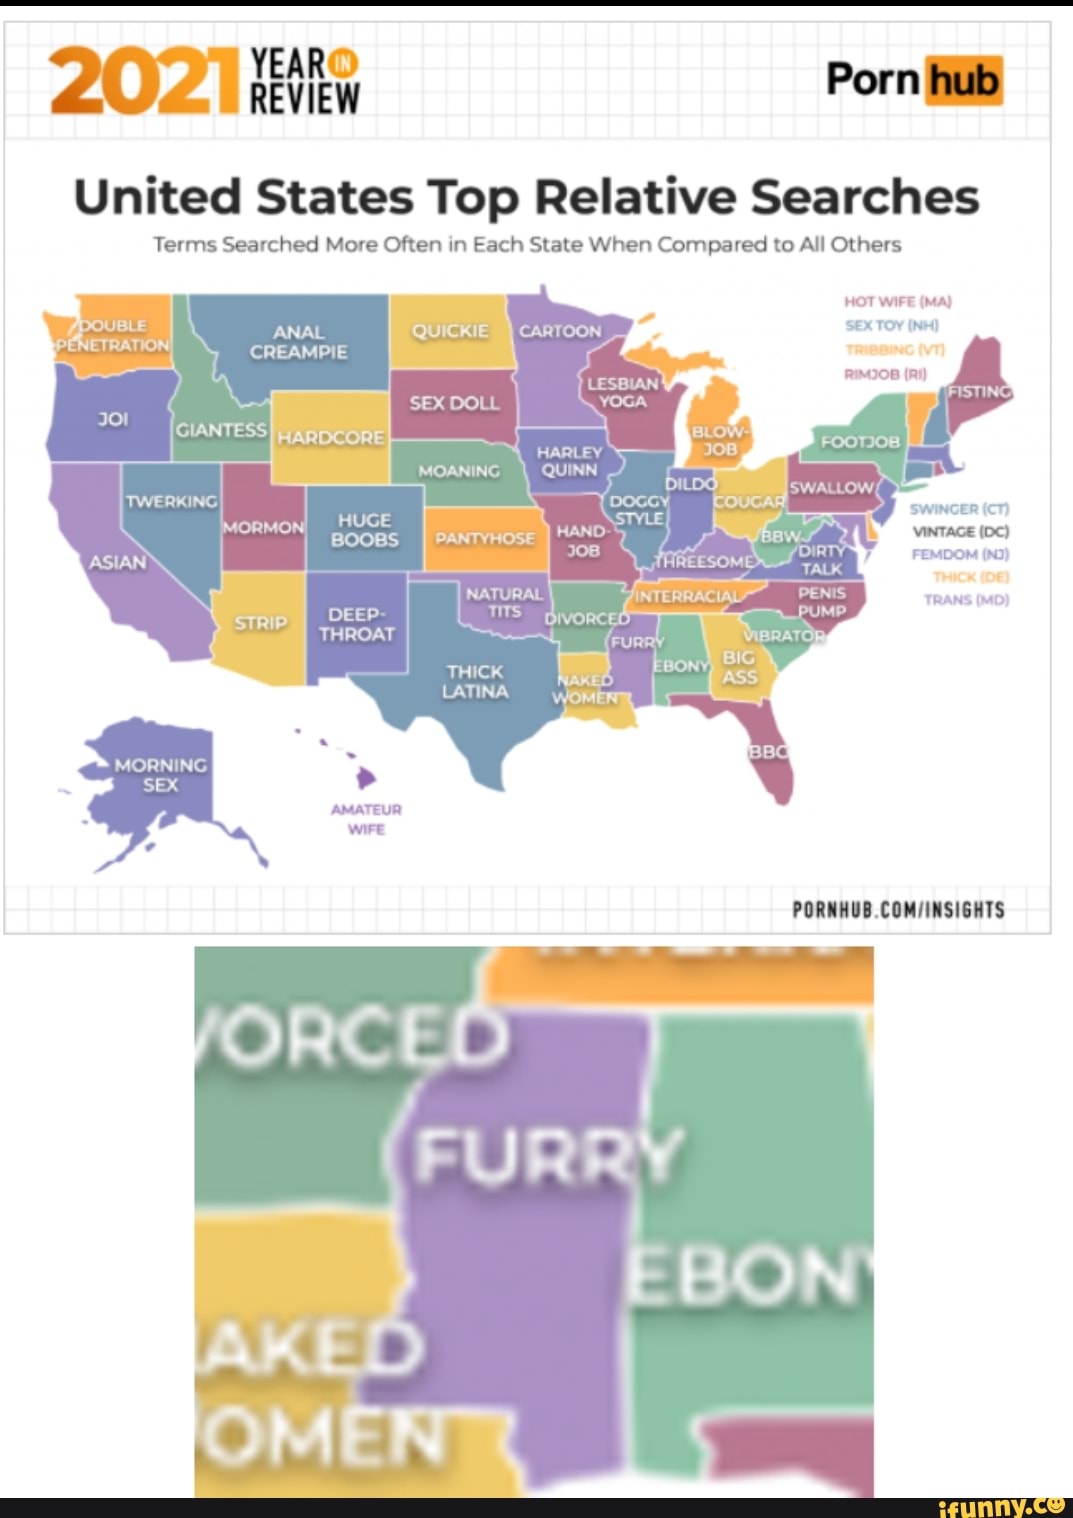 REVIEW Porn hub United States Top Relative Searches Terms Searched More Often in Each State When pic